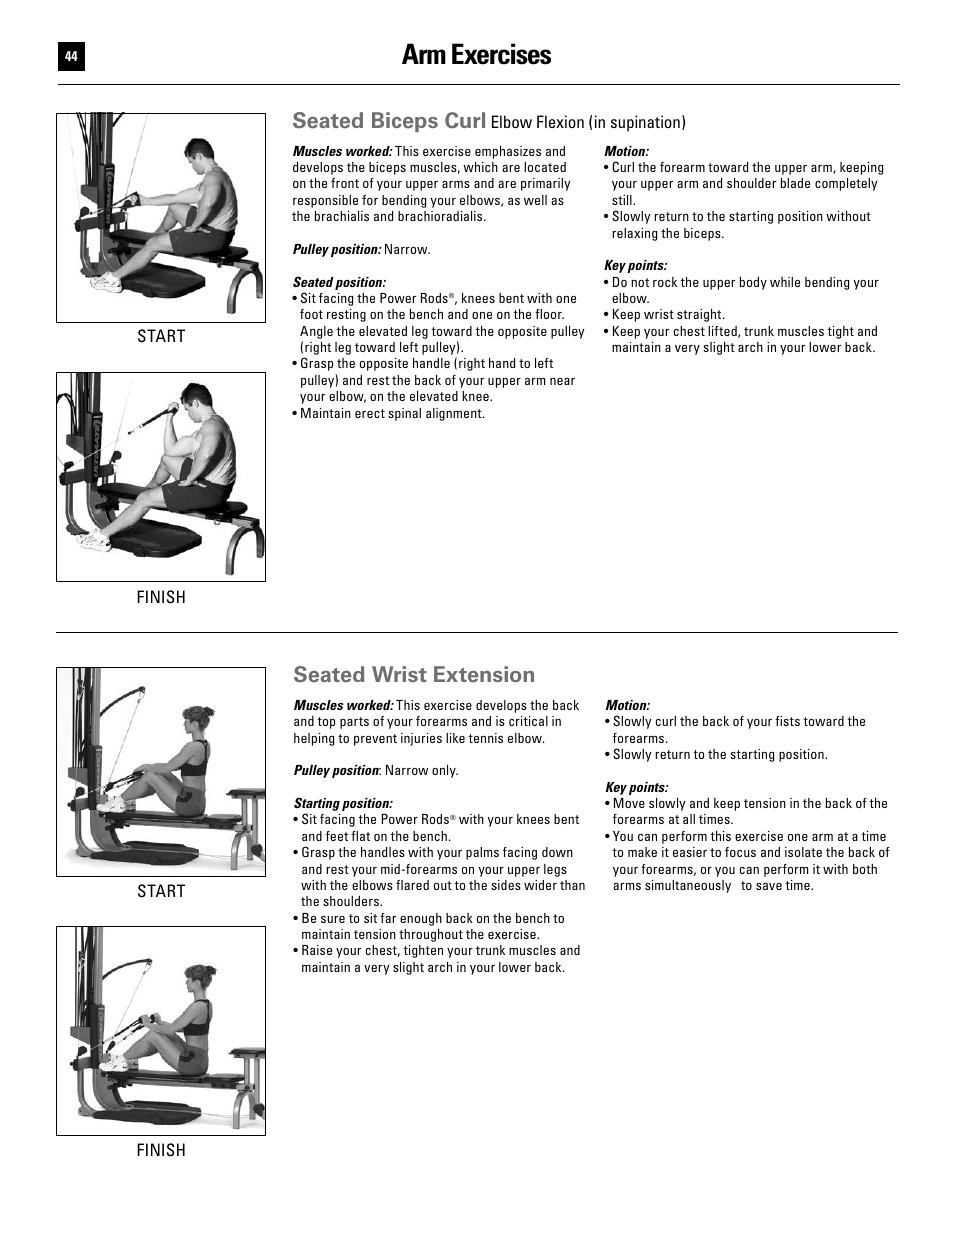 Arm exercises, Seated biceps curl, Seated wrist extension | Bowflex Ultimate User Manual | Page 44 / 110